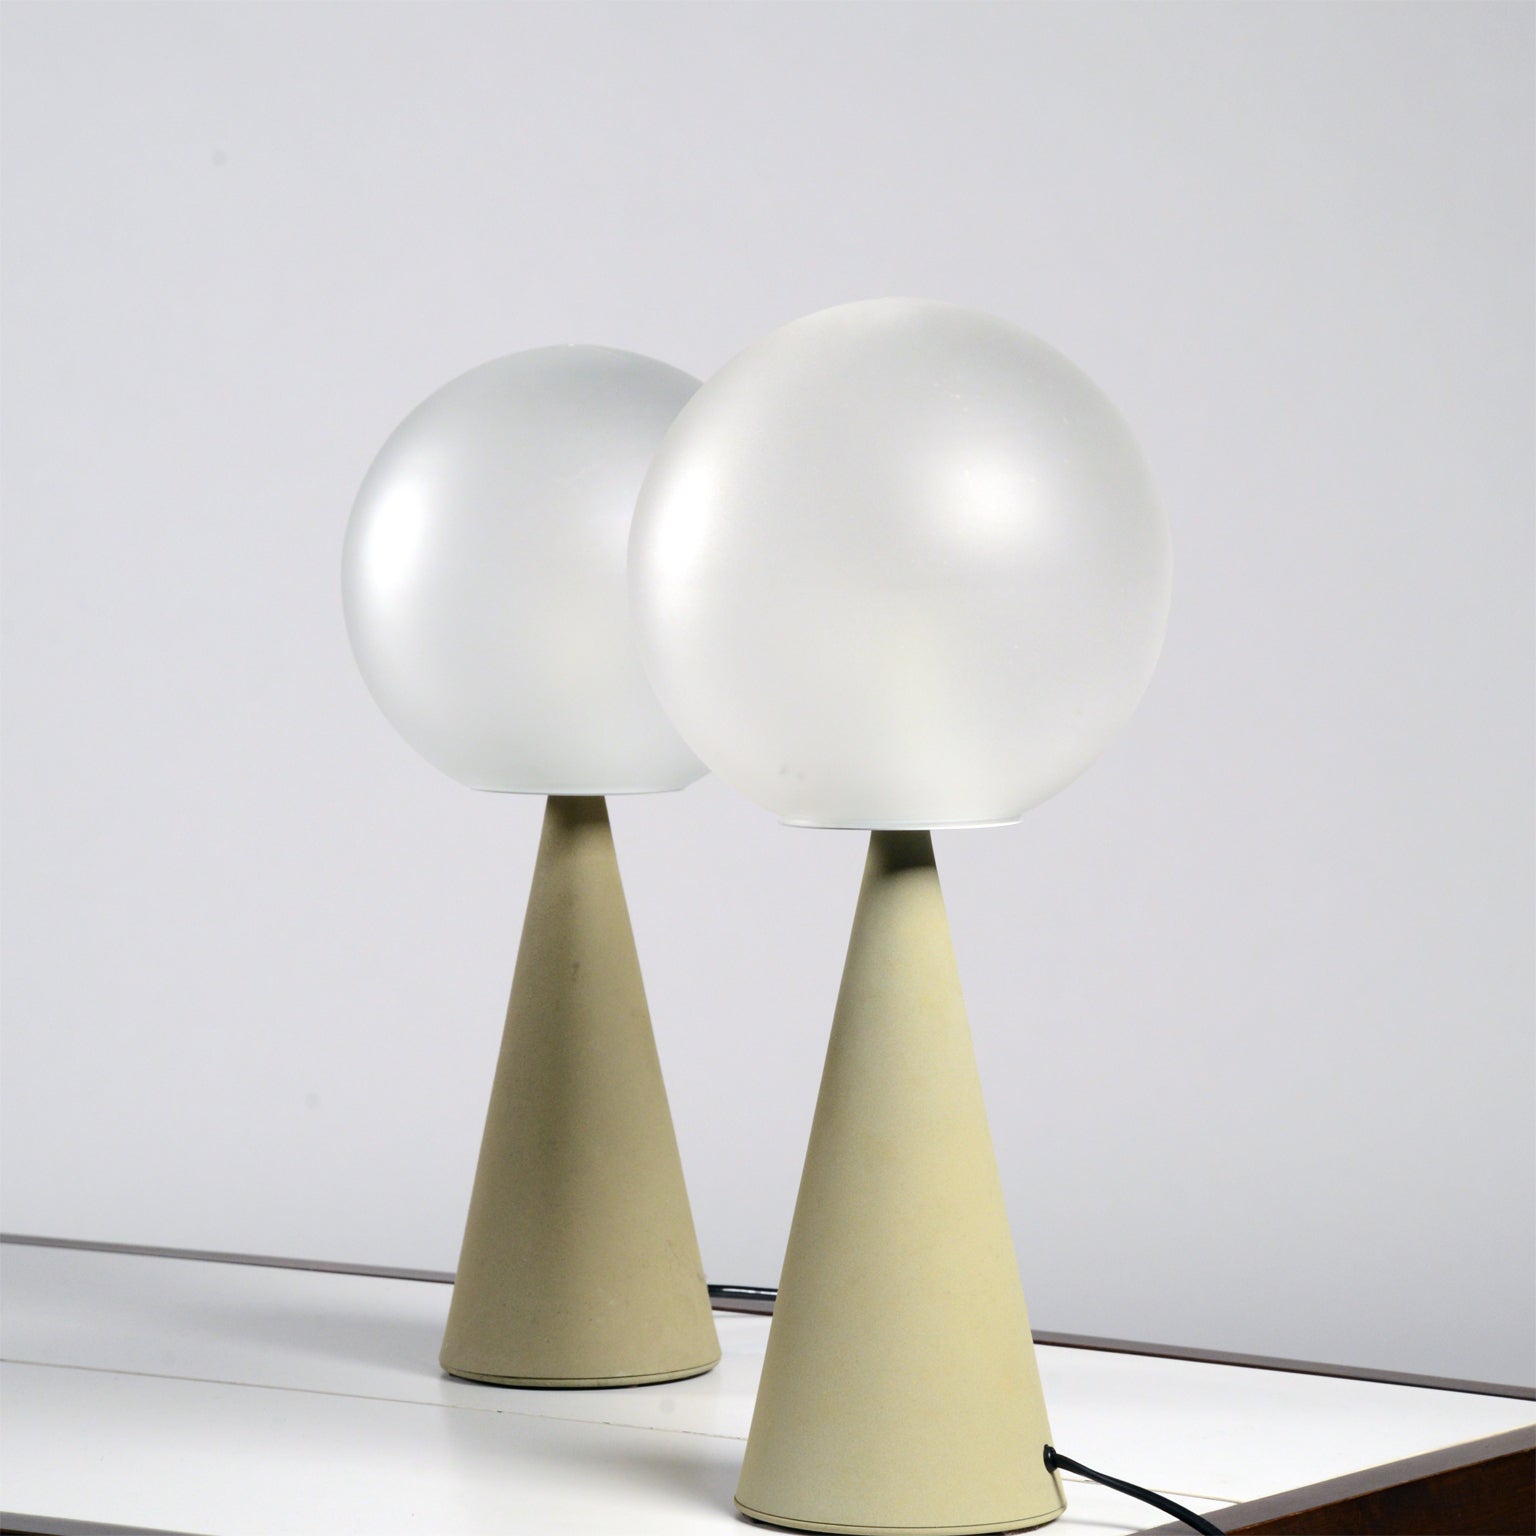 Pair of Bilia table lamps by Gio Ponti for Fontana Arte